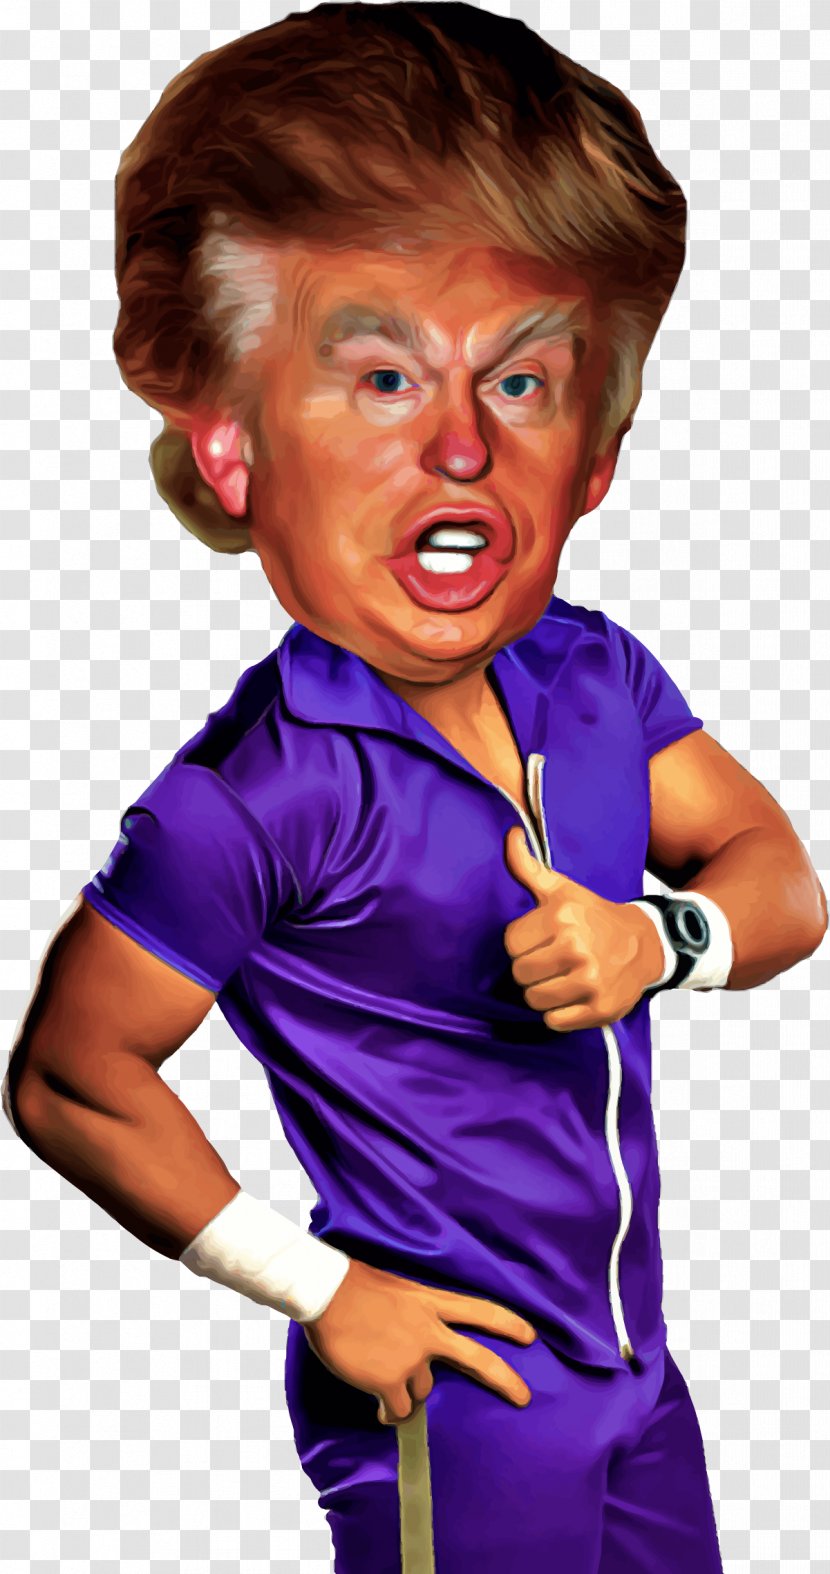 Donald Trump President Of The United States US Presidential Election 2016 Republican Party Candidates, - Neck - Fun Transparent PNG